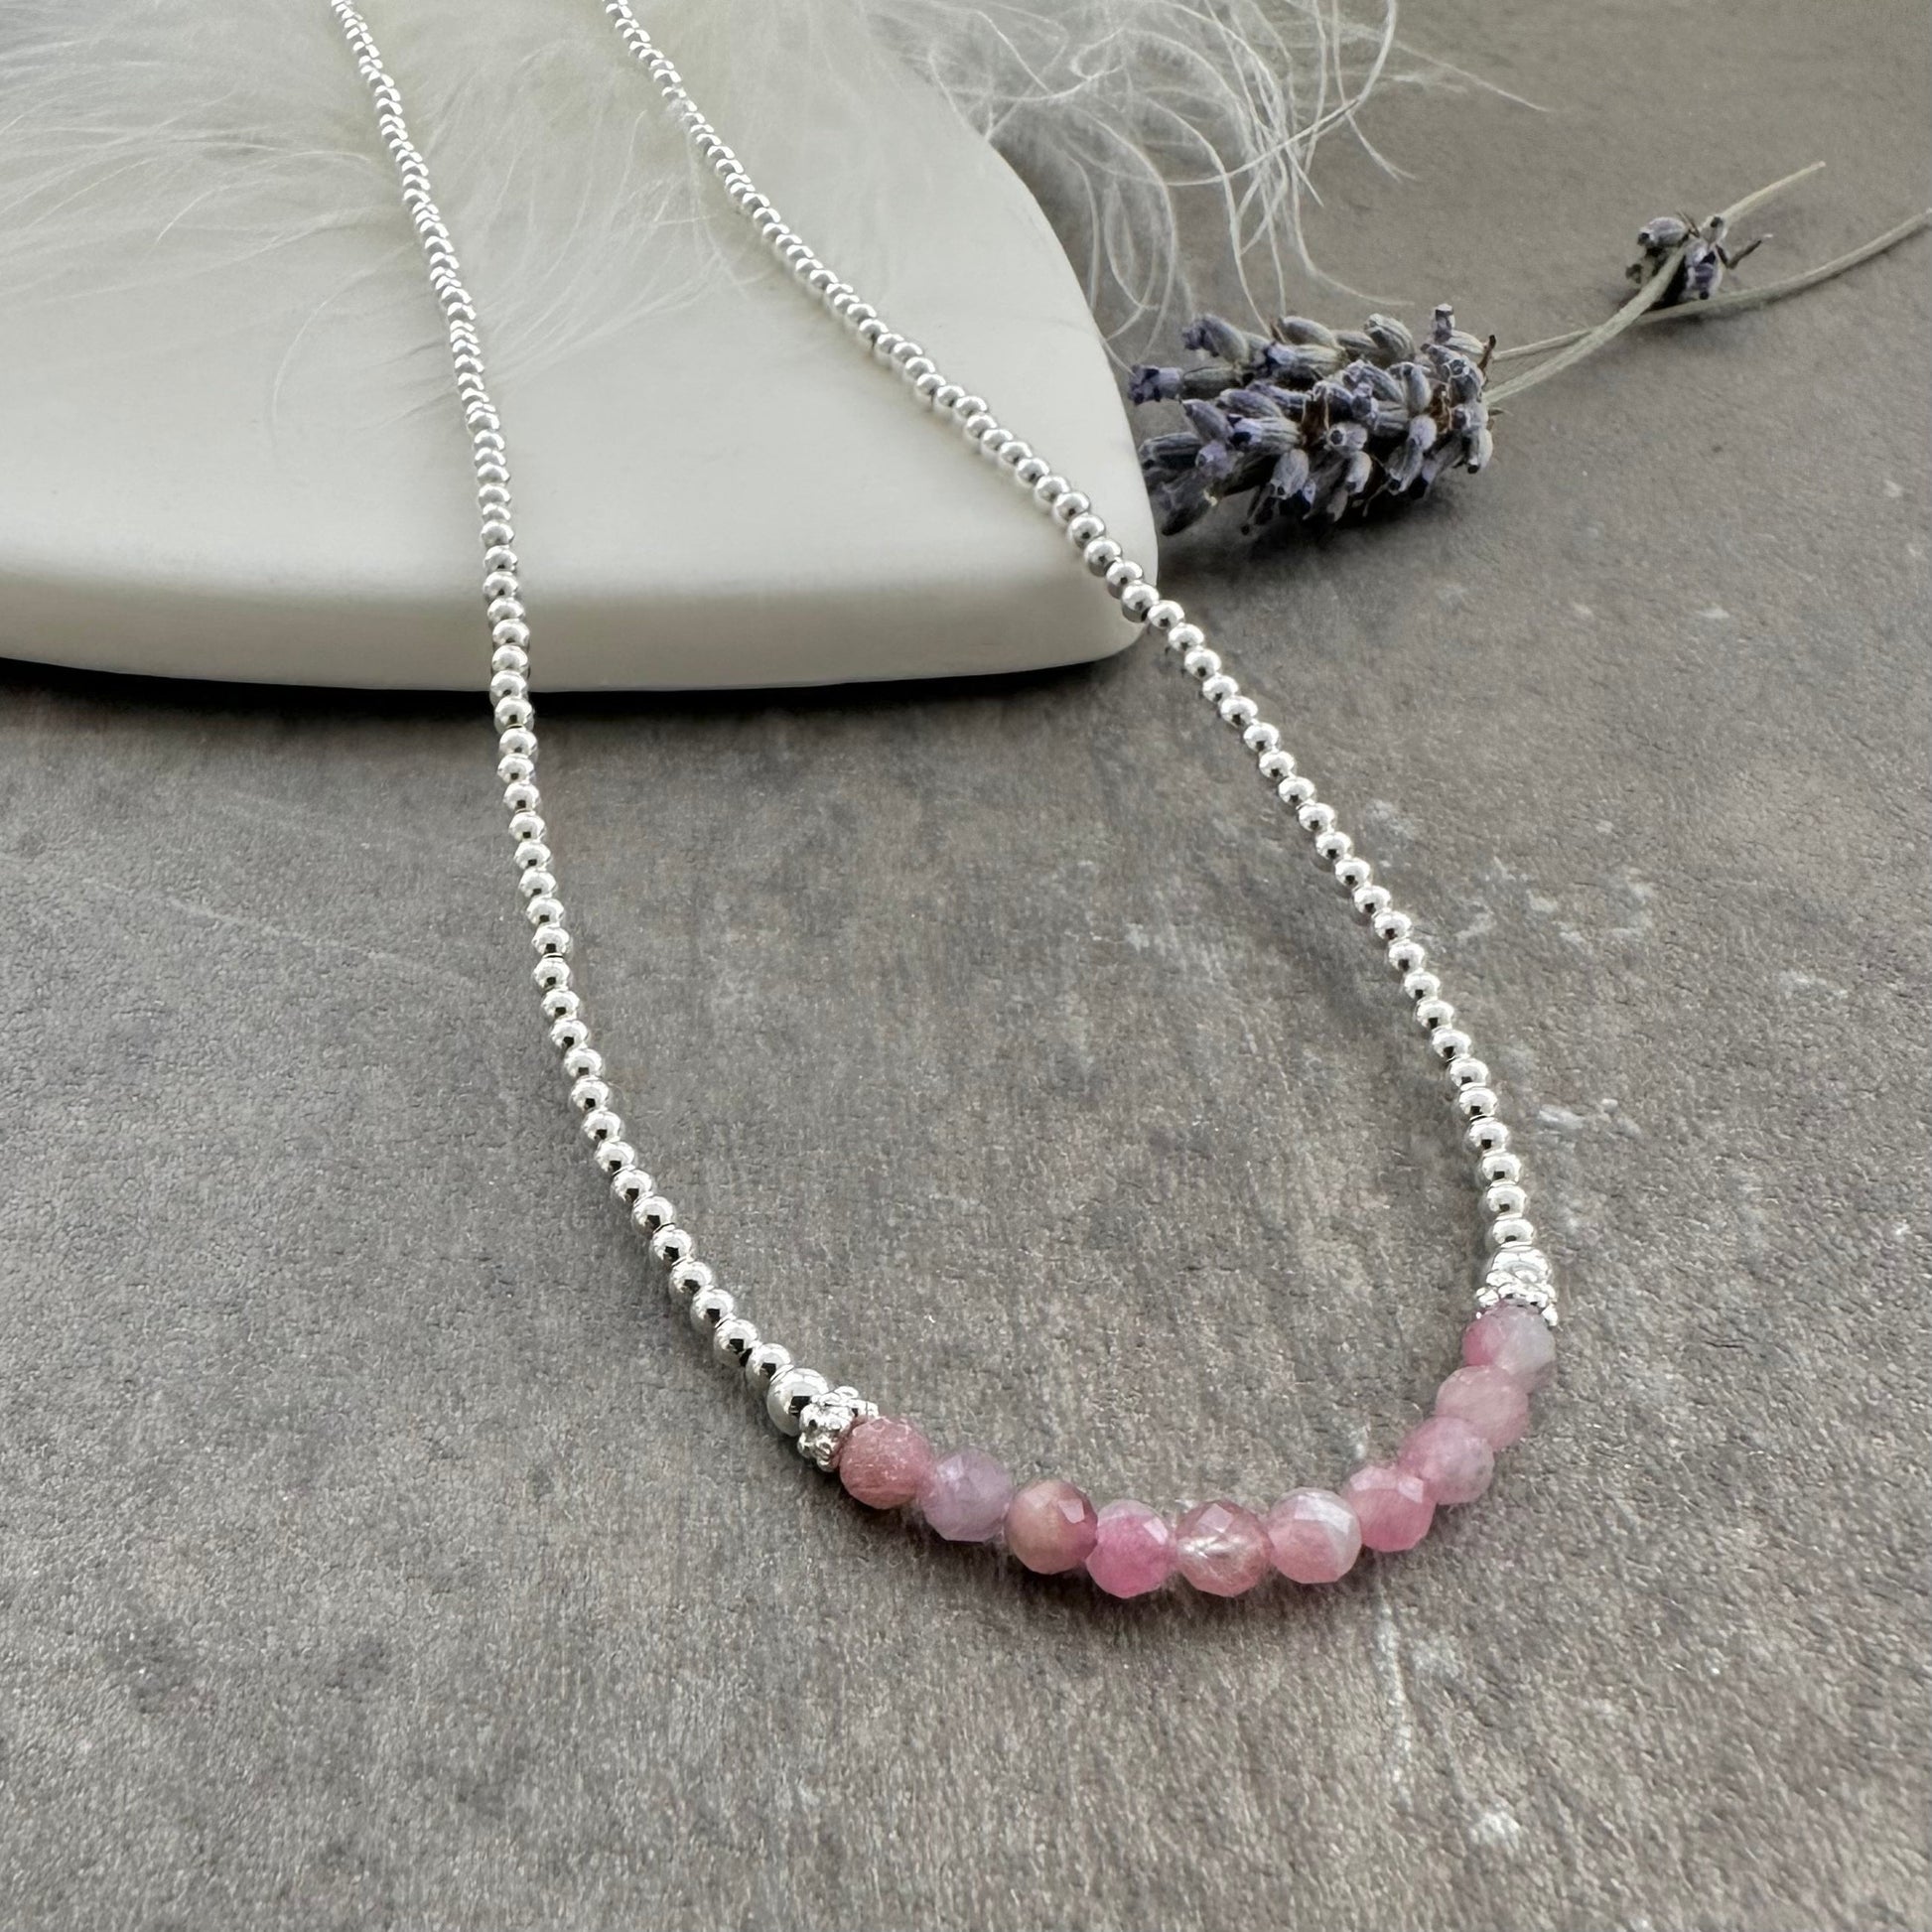 Thin Pale Pink Tourmaline and Sterling Silver Bead Necklace, October Birthstone, dainty silver necklace